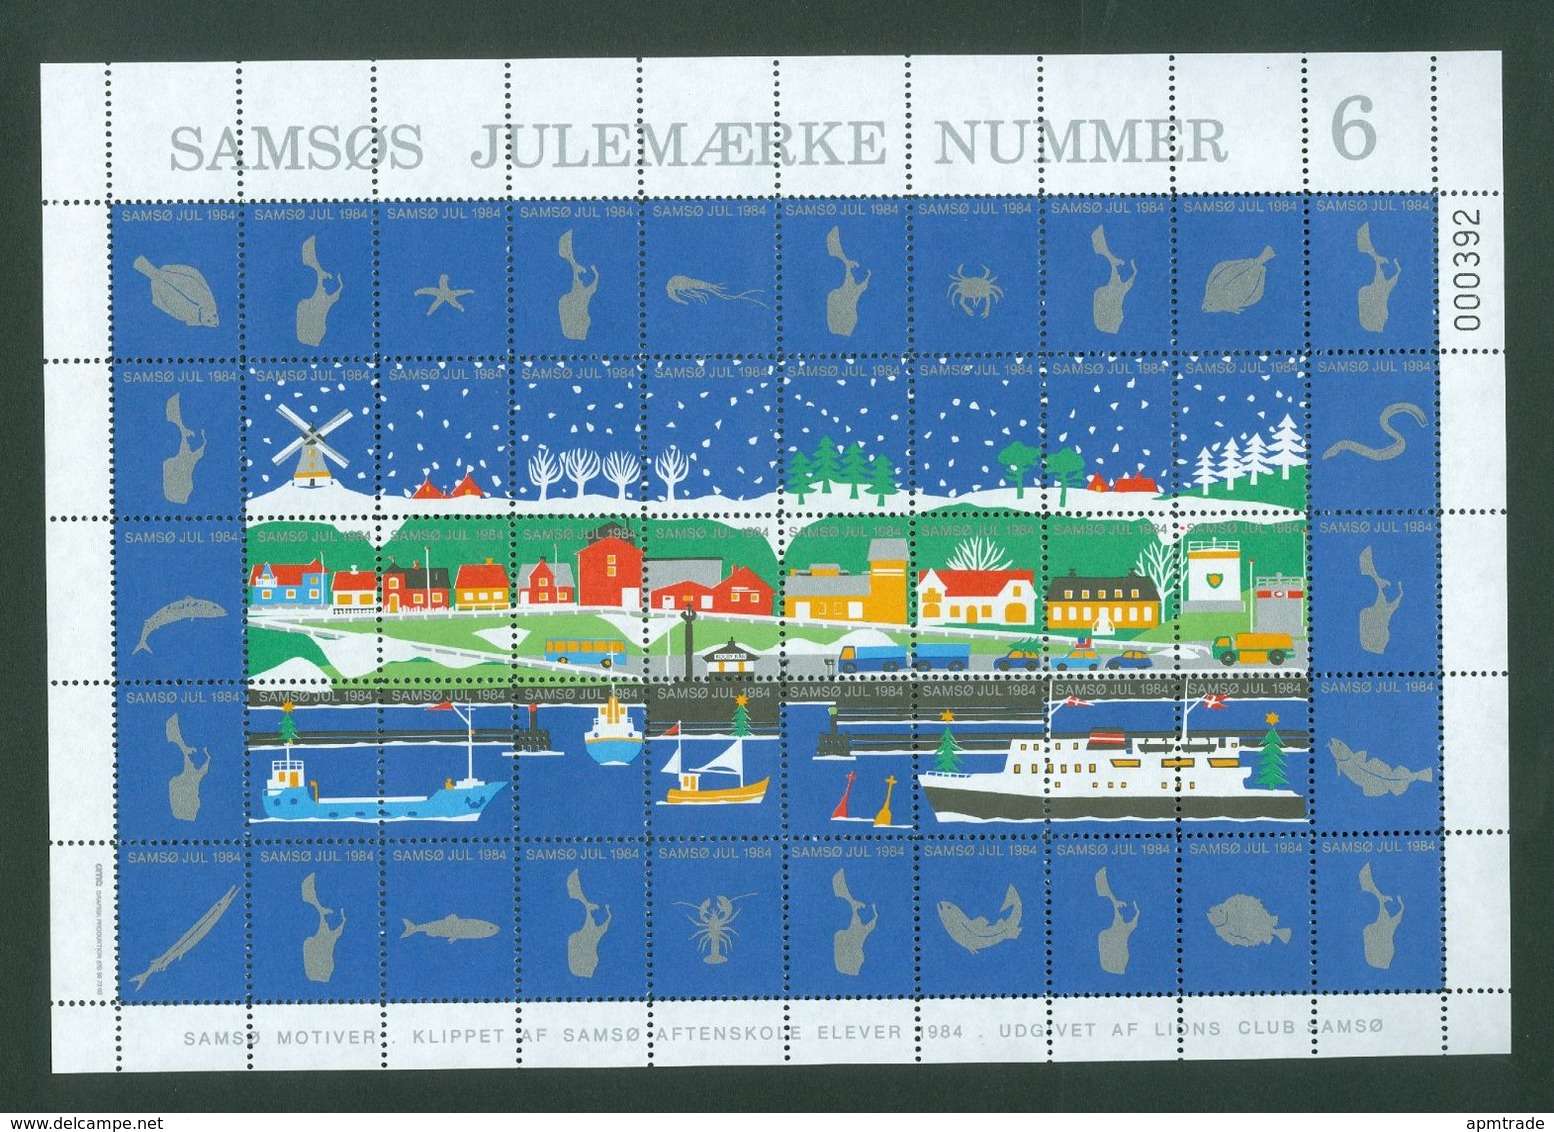 Denmark. Christmas Sheet Local Samso # 6 Lions Club 1984. Windmill,Ferry,Cars - Full Sheets & Multiples